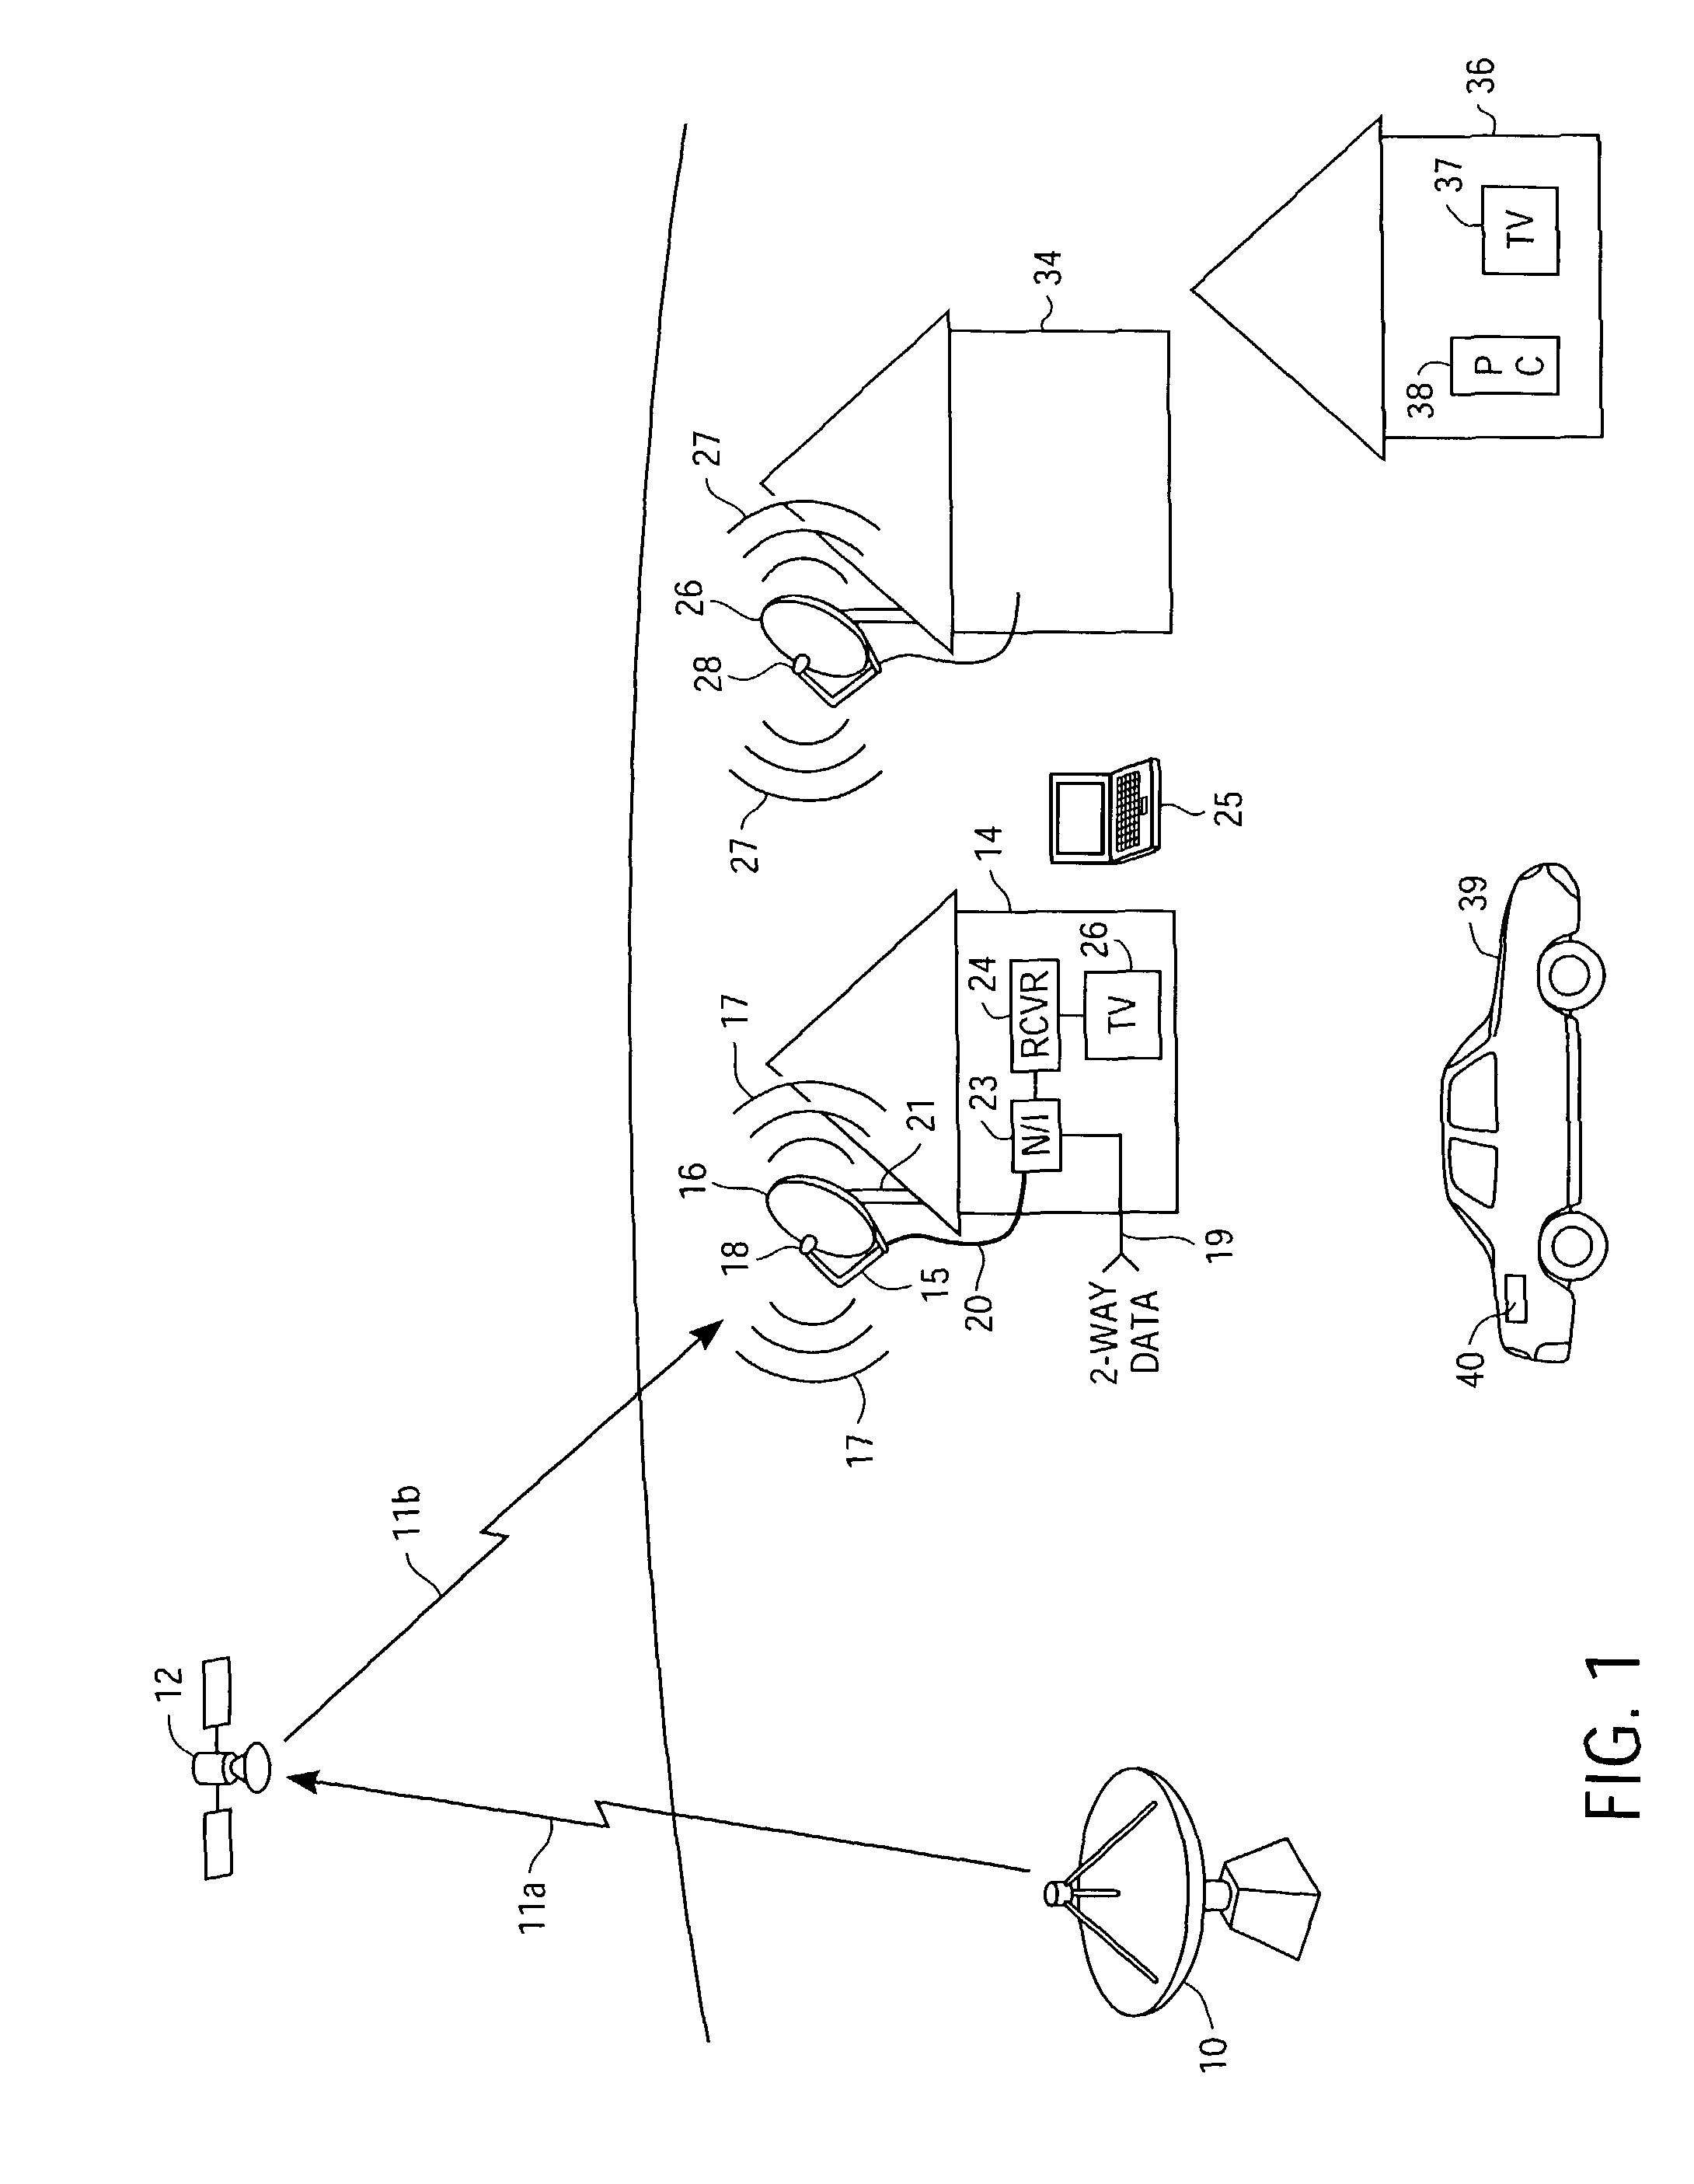 Apparatus and method for wireless video gaming